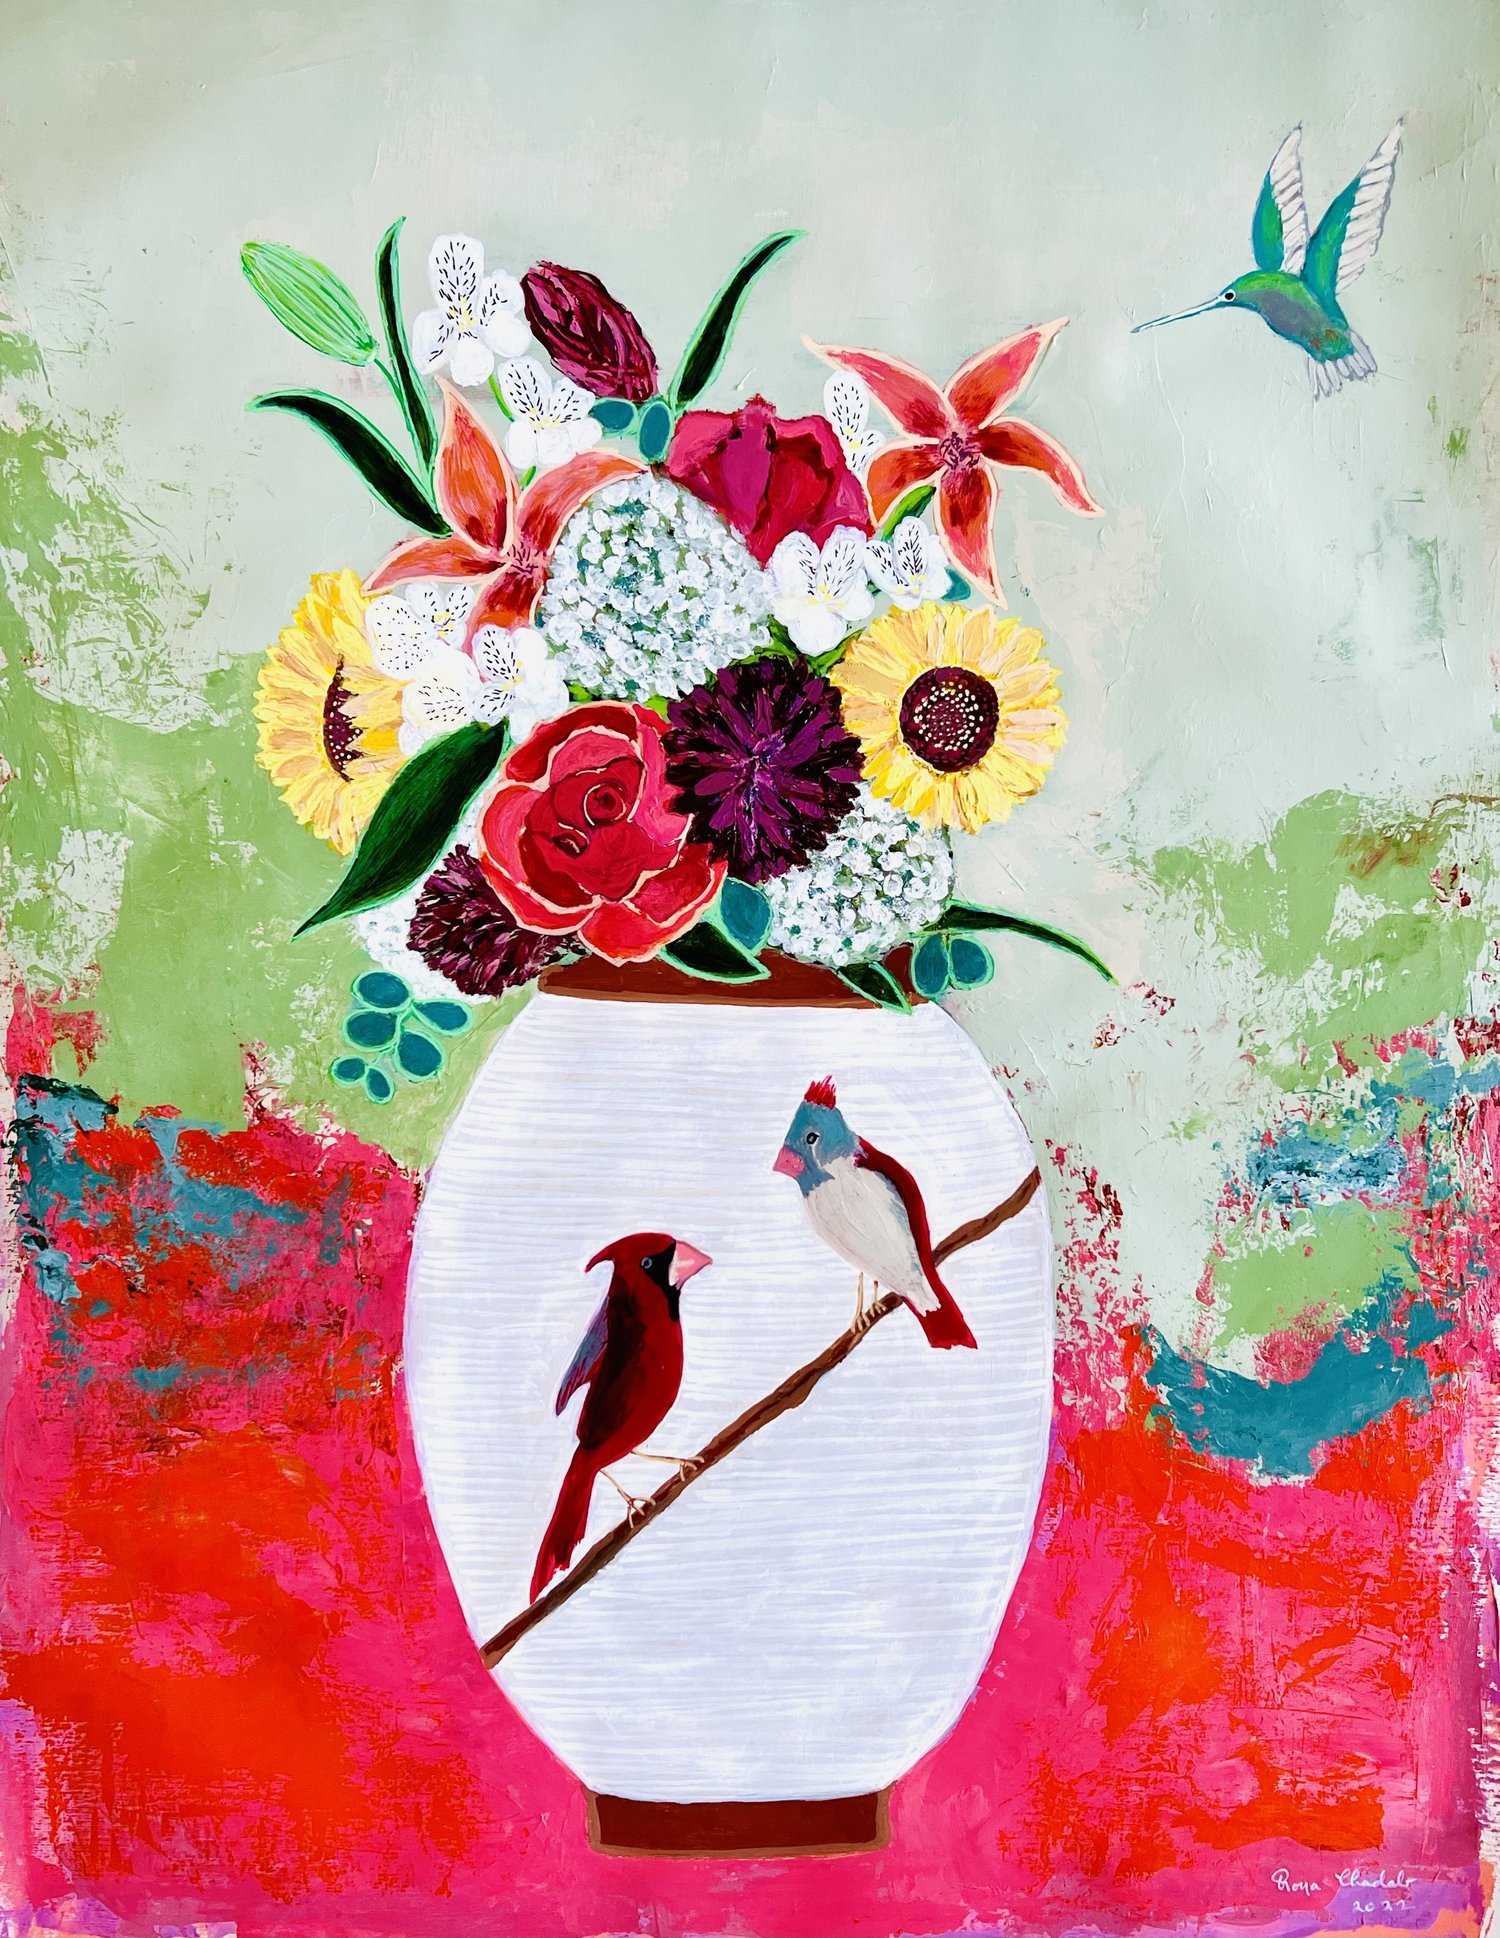   The Cardinal and the Hummingbird by Roya Chadab   30”x 36” unframed, Acrylic and pen on canva paper,   Is the hummingbird flying into the vase to join the cardinals or did the cardinals escape the hummingbird? 